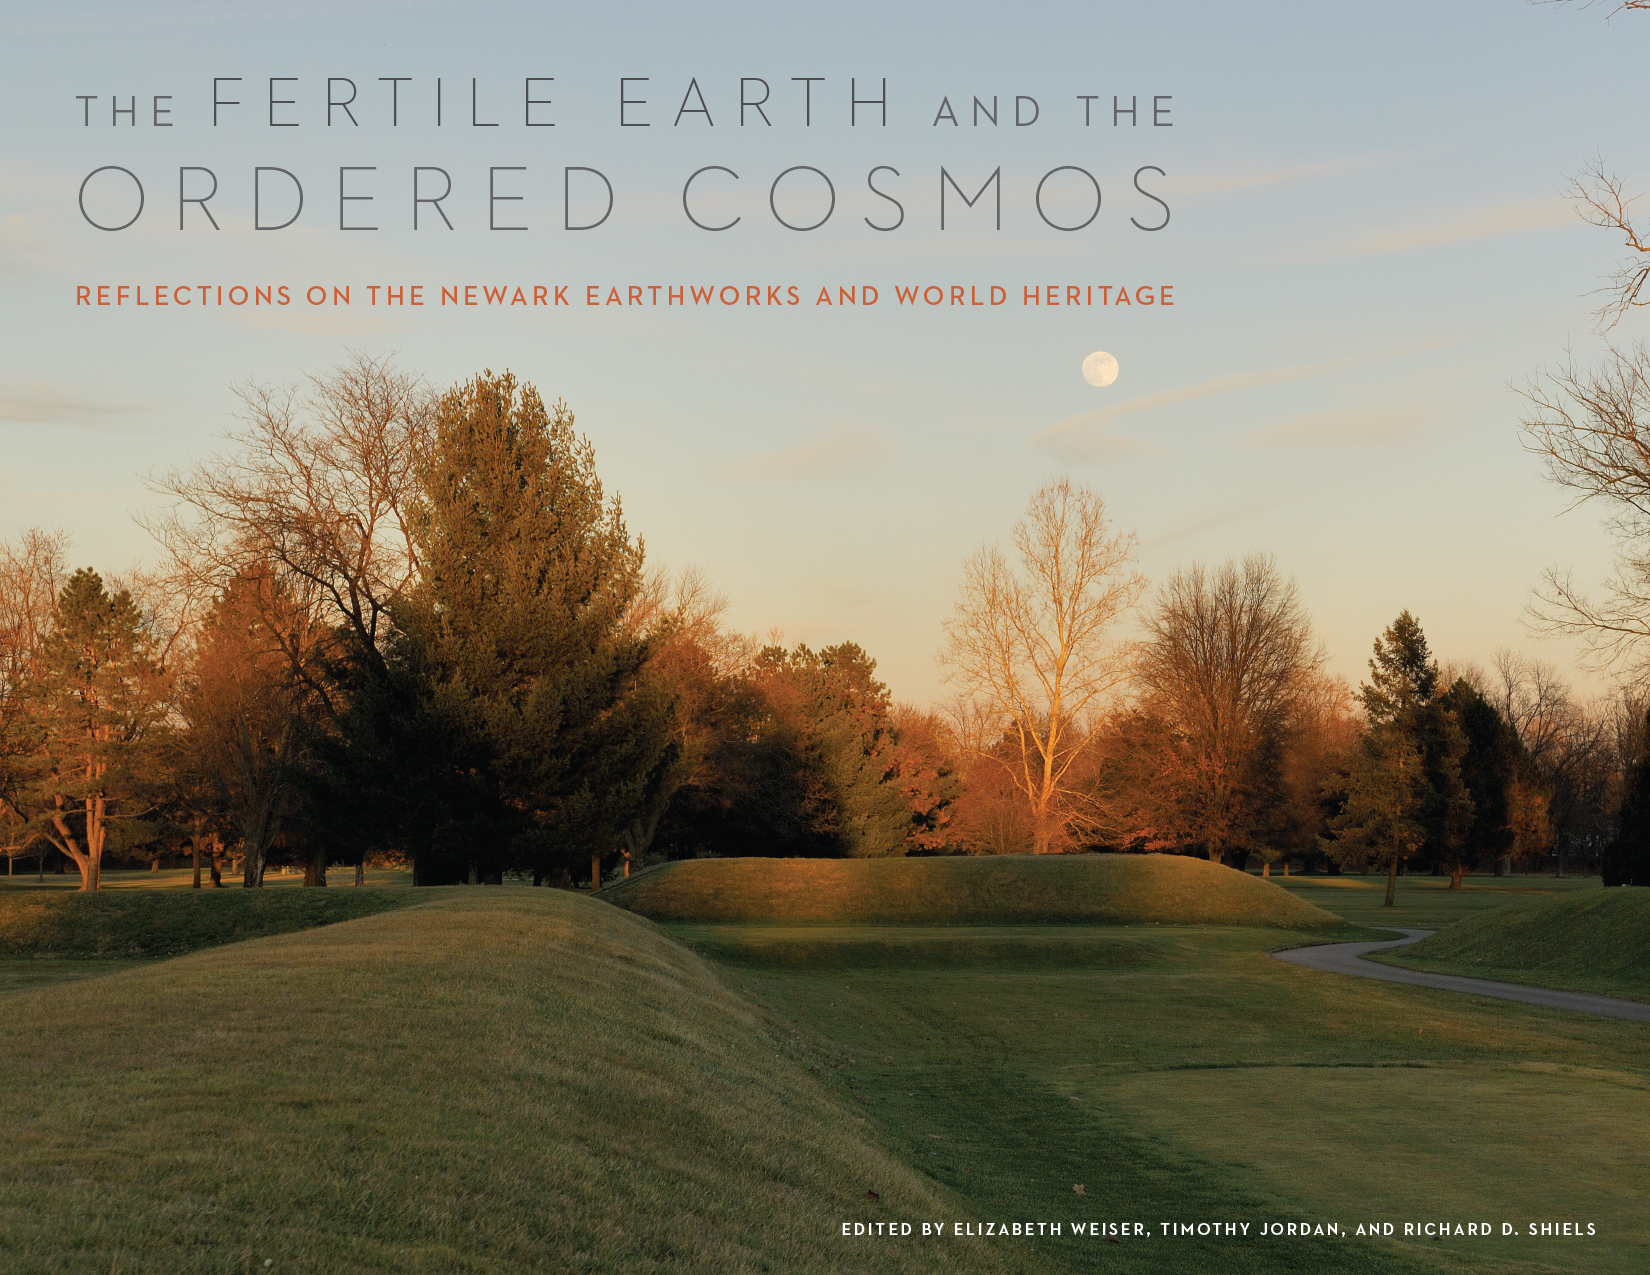 Front cover of The Fertile Earth and the Ordered Cosmos: Reflections on the Newark Earthworks and World Heritage, Edited by M. Elizabeth Weiser, Timothy R. W. Jordan, and Richard D. Shiels, featuring a photo of grass-covered earth mounds, trees in the background, and the full moon in the early twilight sky.